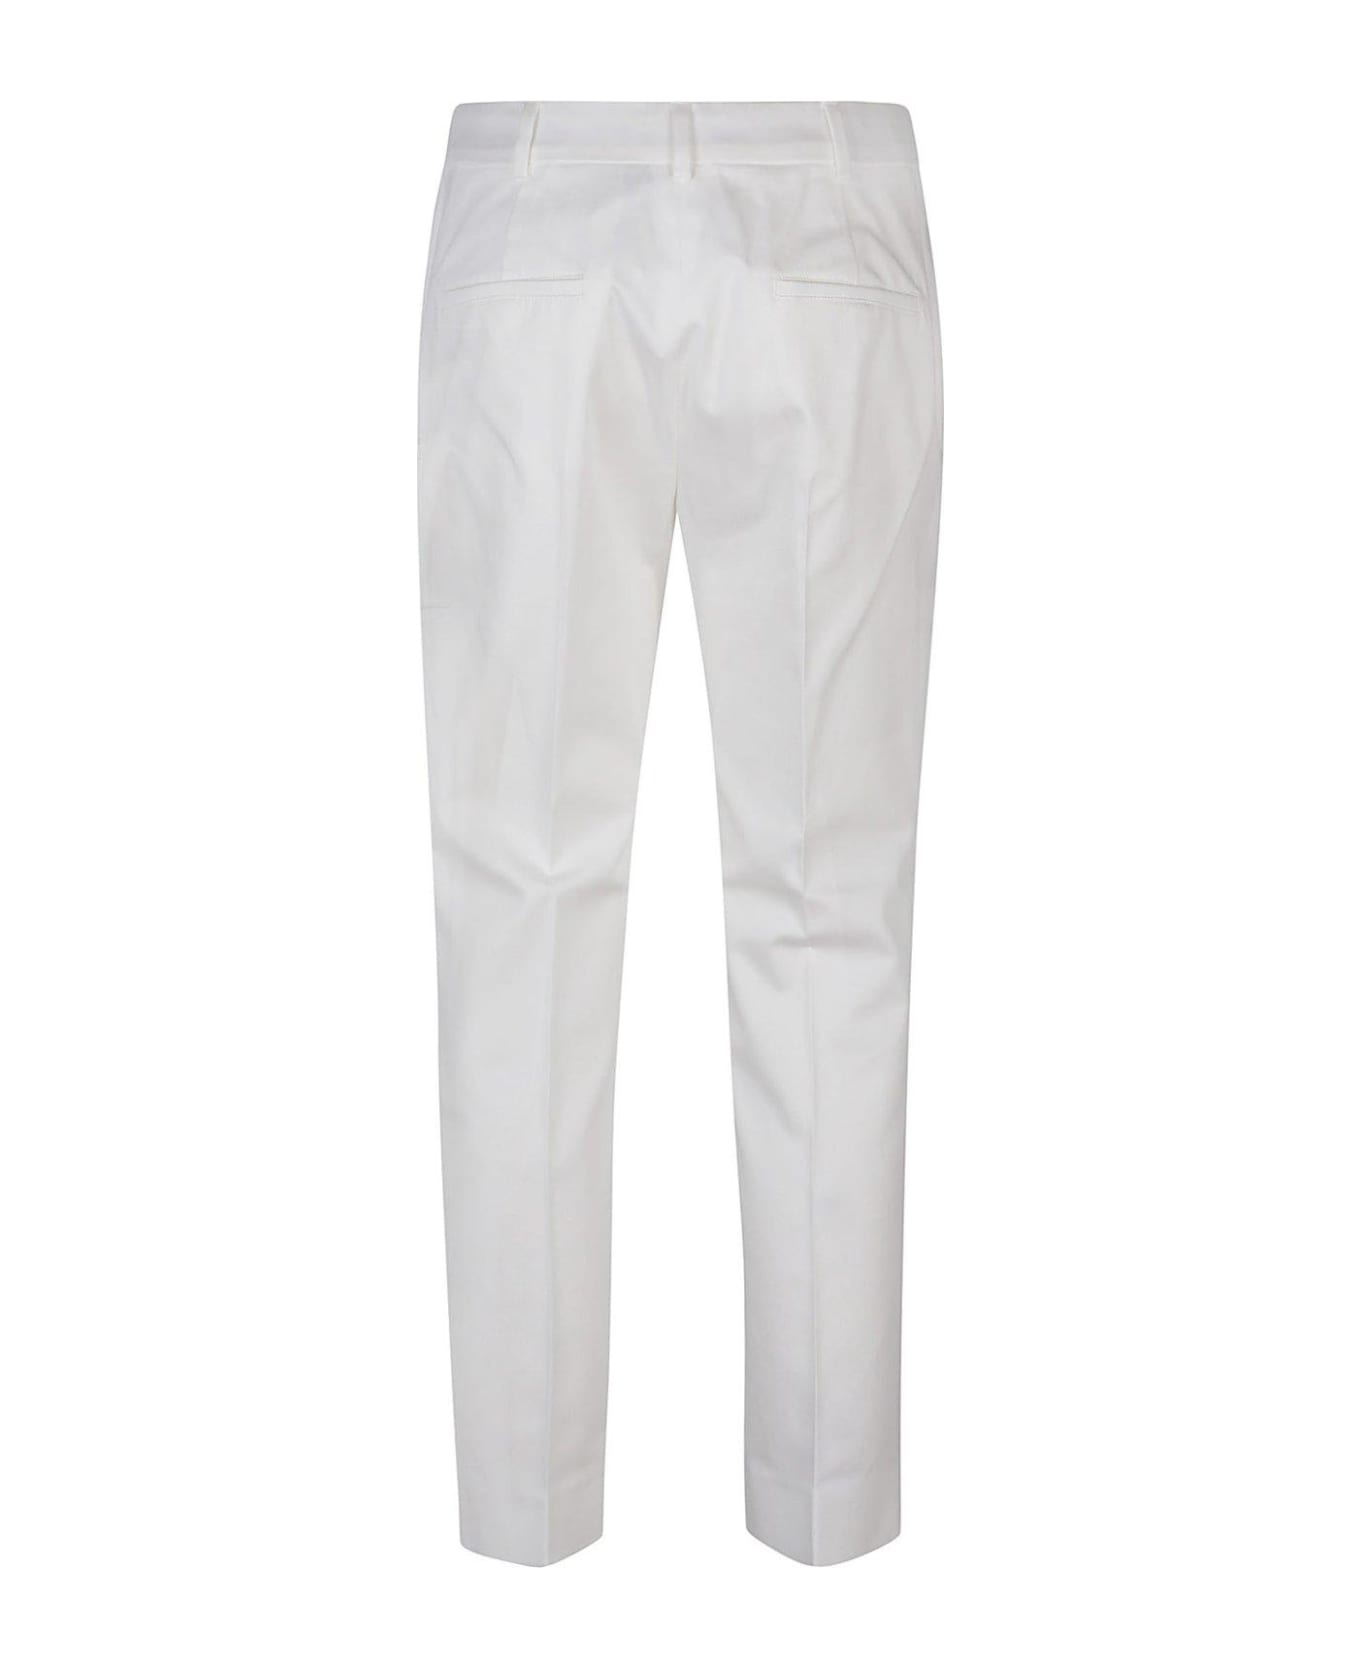 Max Mara Tapered Cropped Trousers - White ボトムス